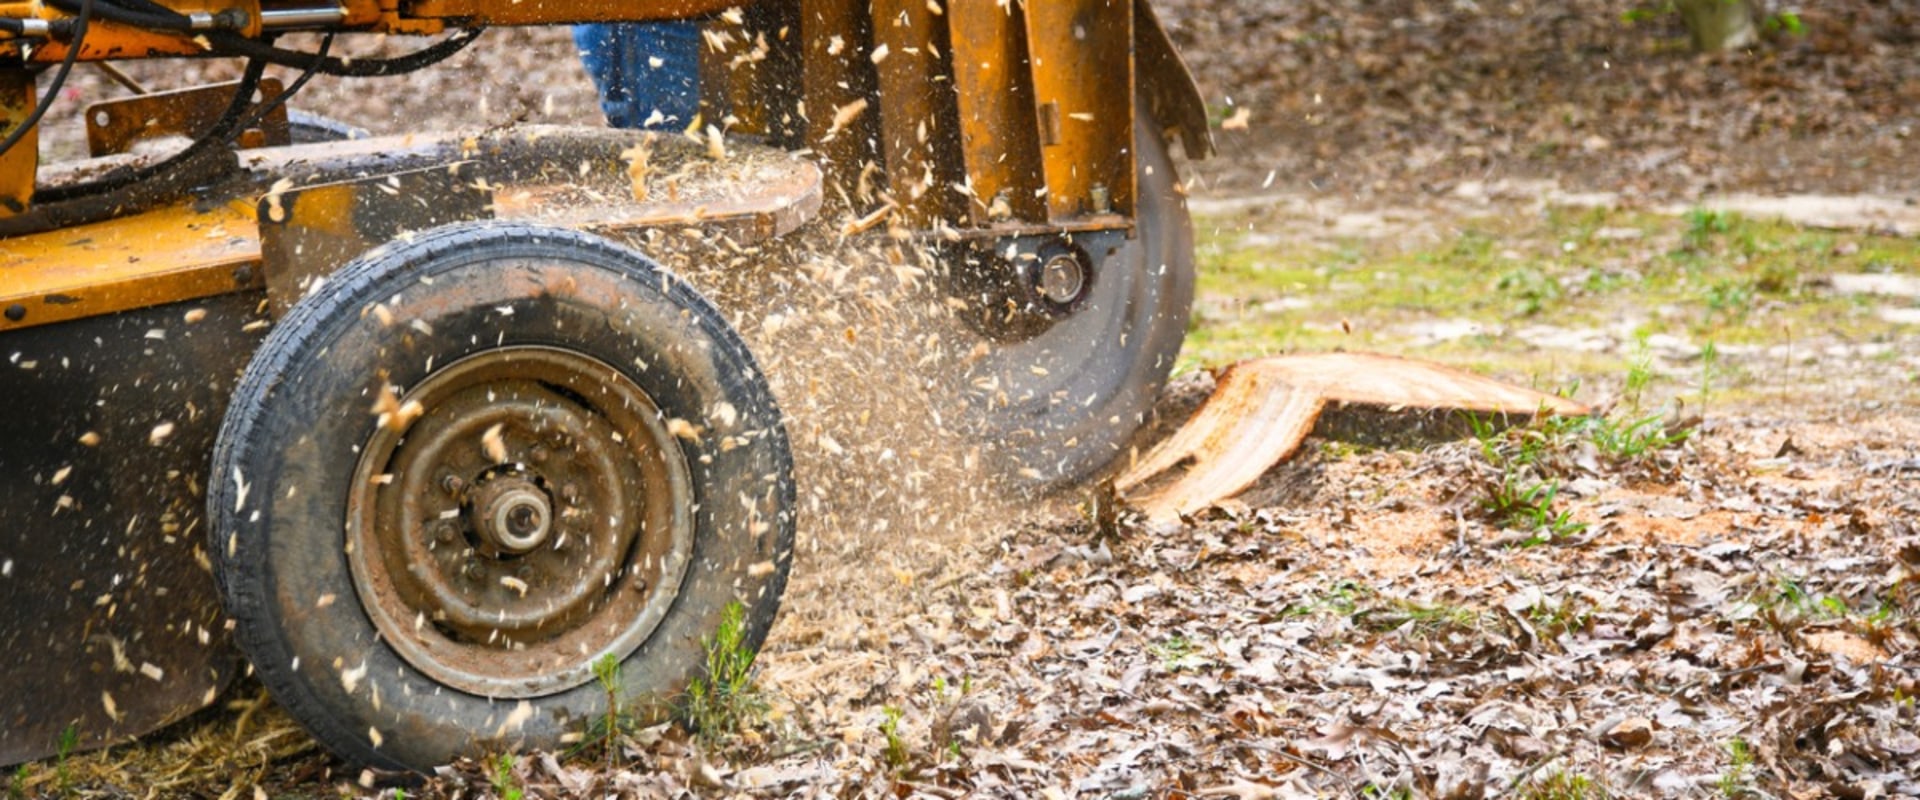 Factors Affecting Stump Grinding and Removal Costs